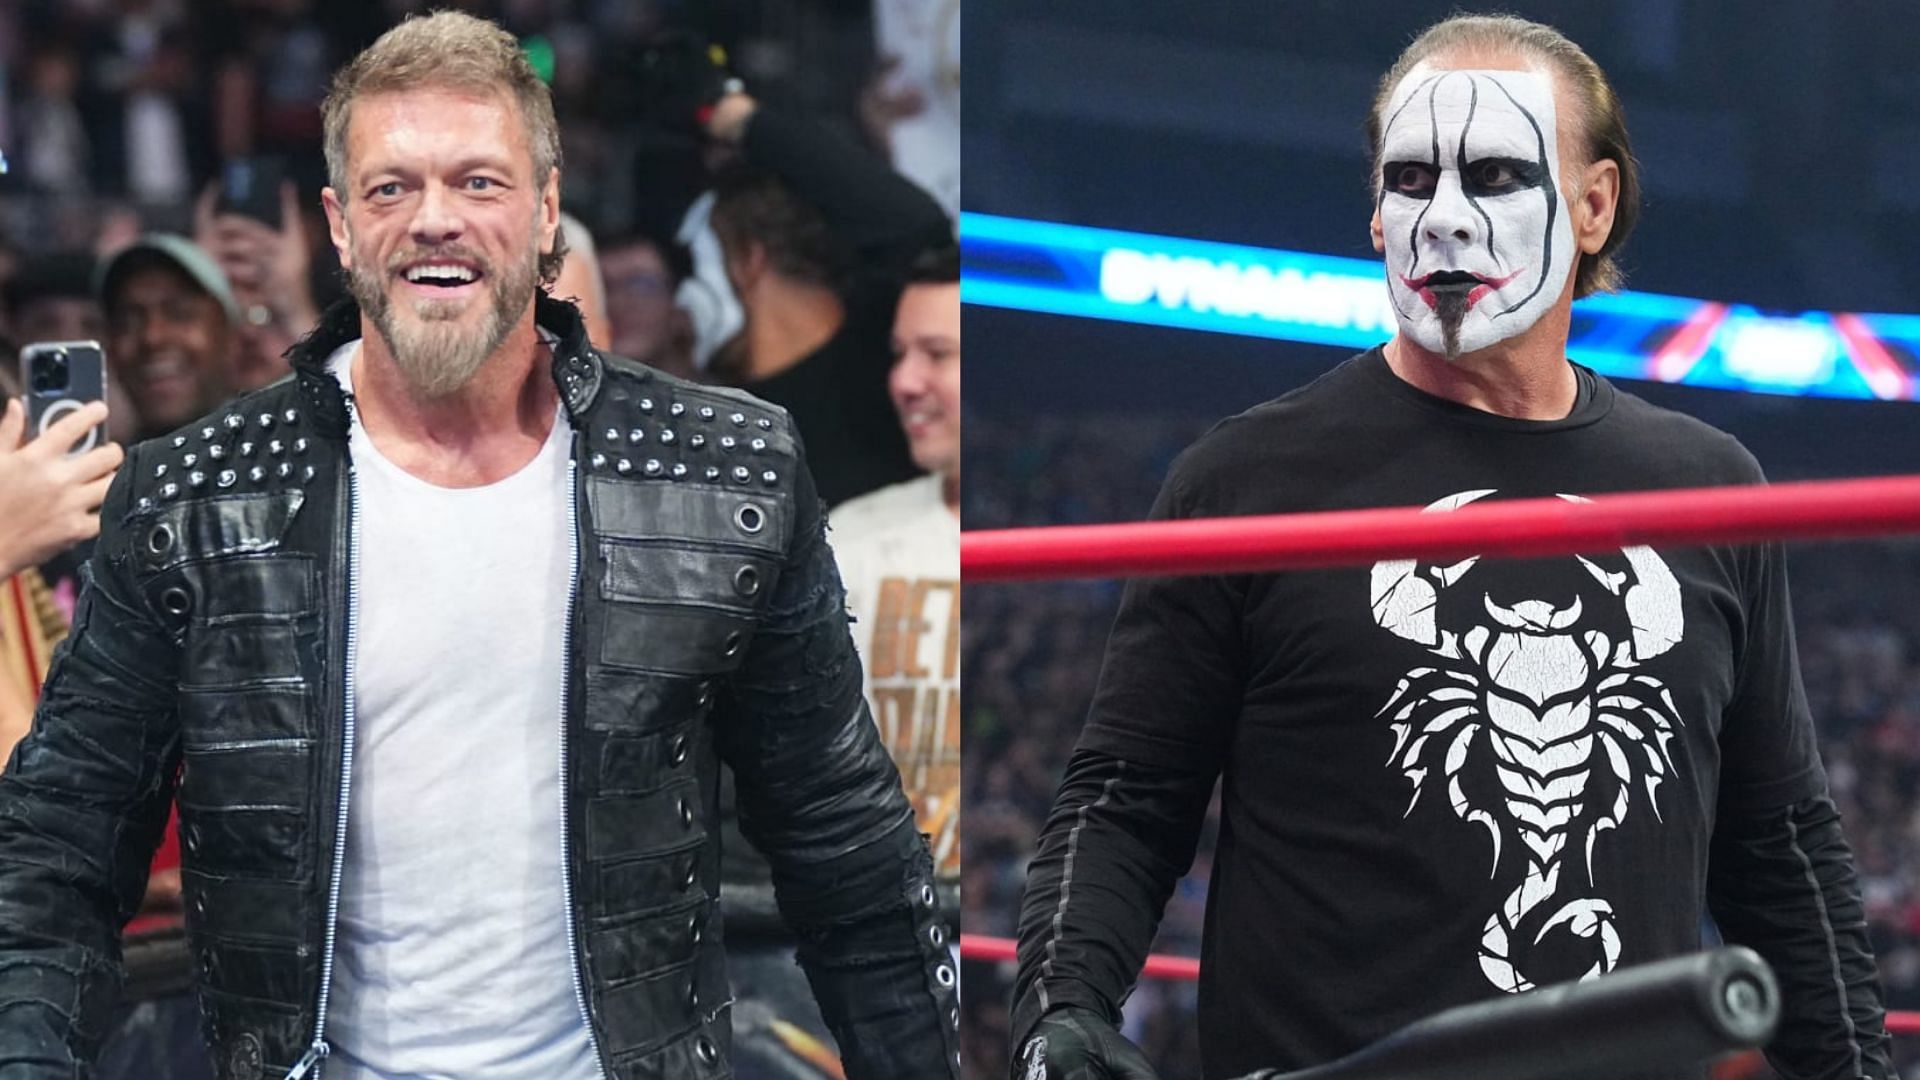 Will The Rated R Superstar be the man to retire Sting?